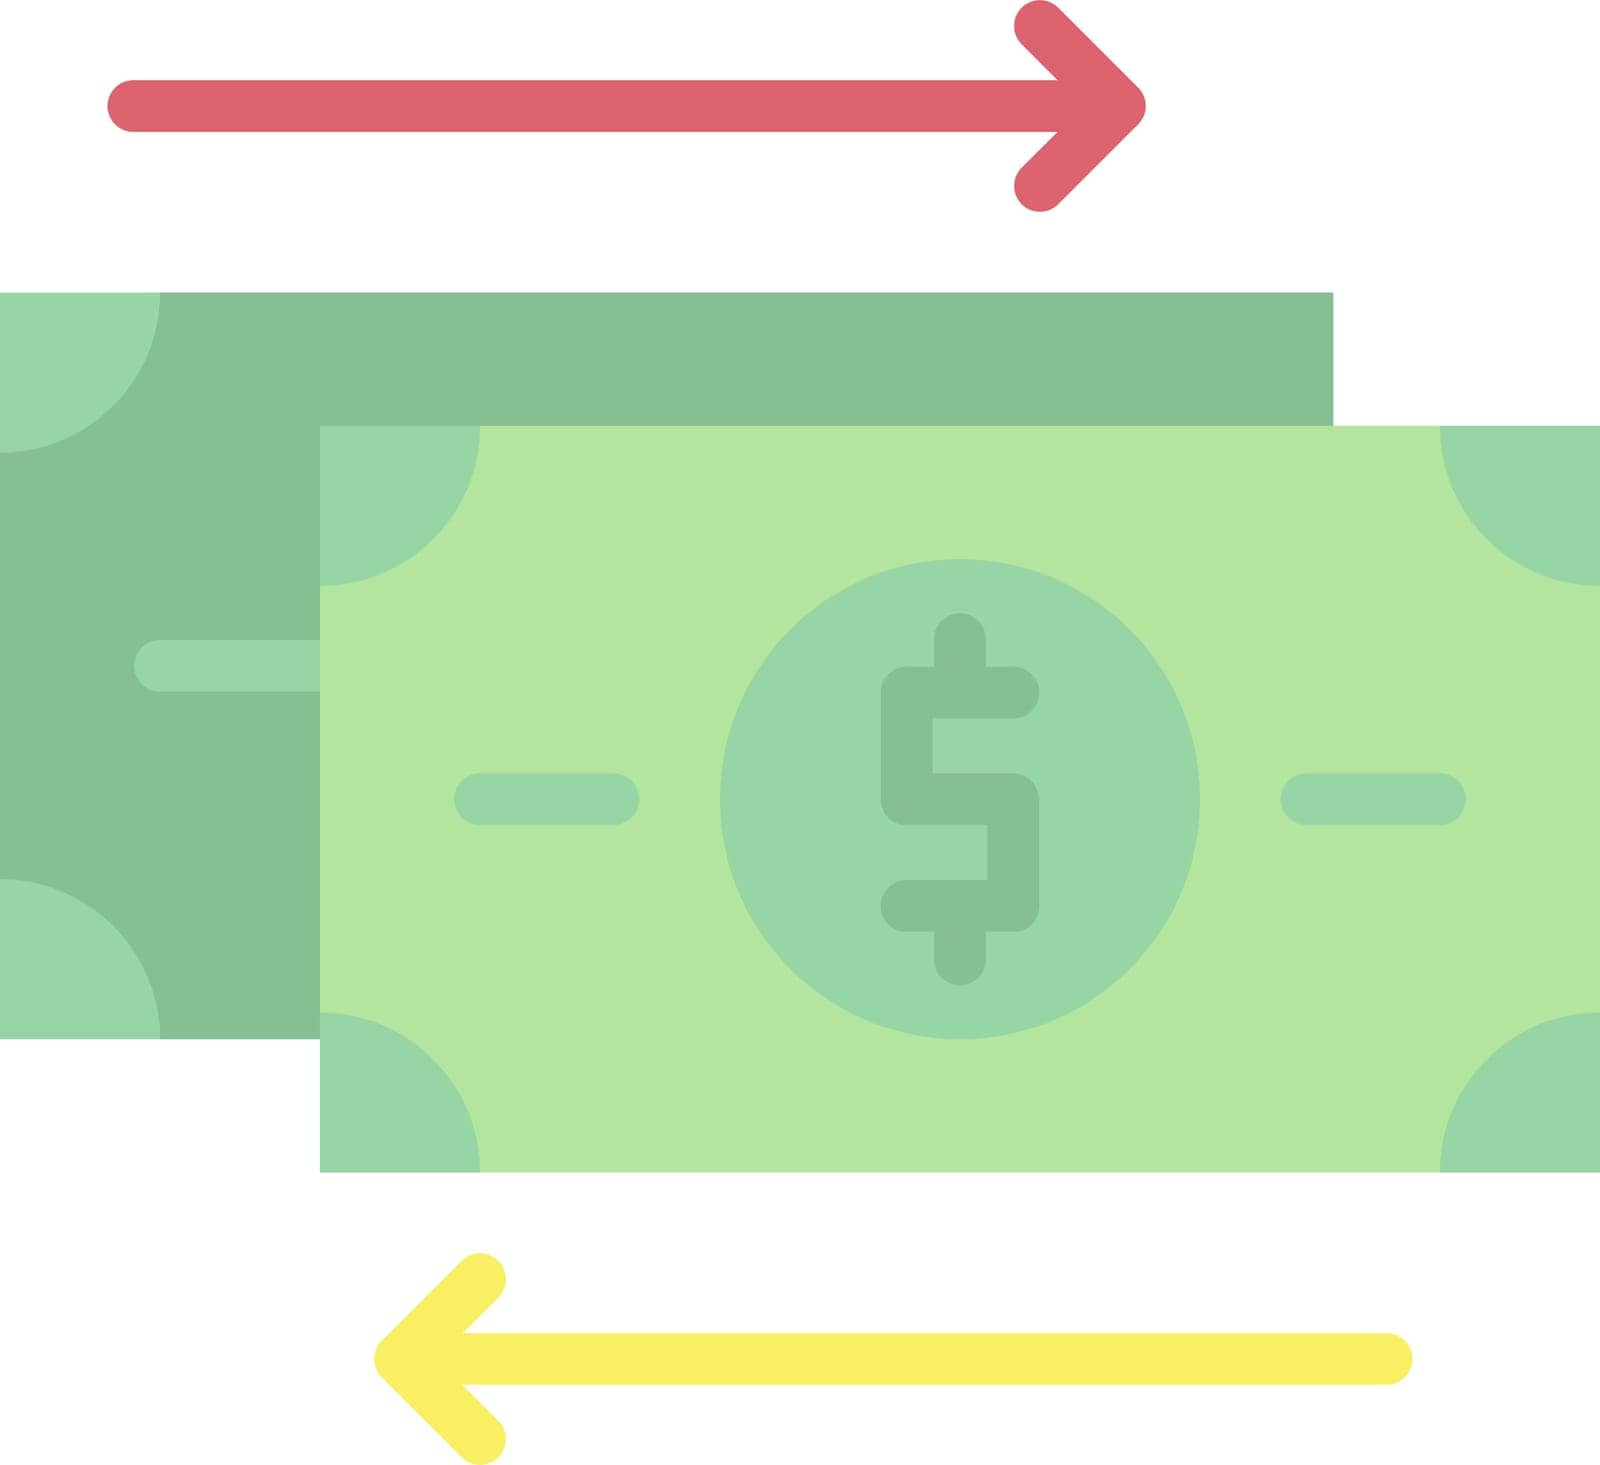 Cash Flow Icon Image. by ICONBUNNY